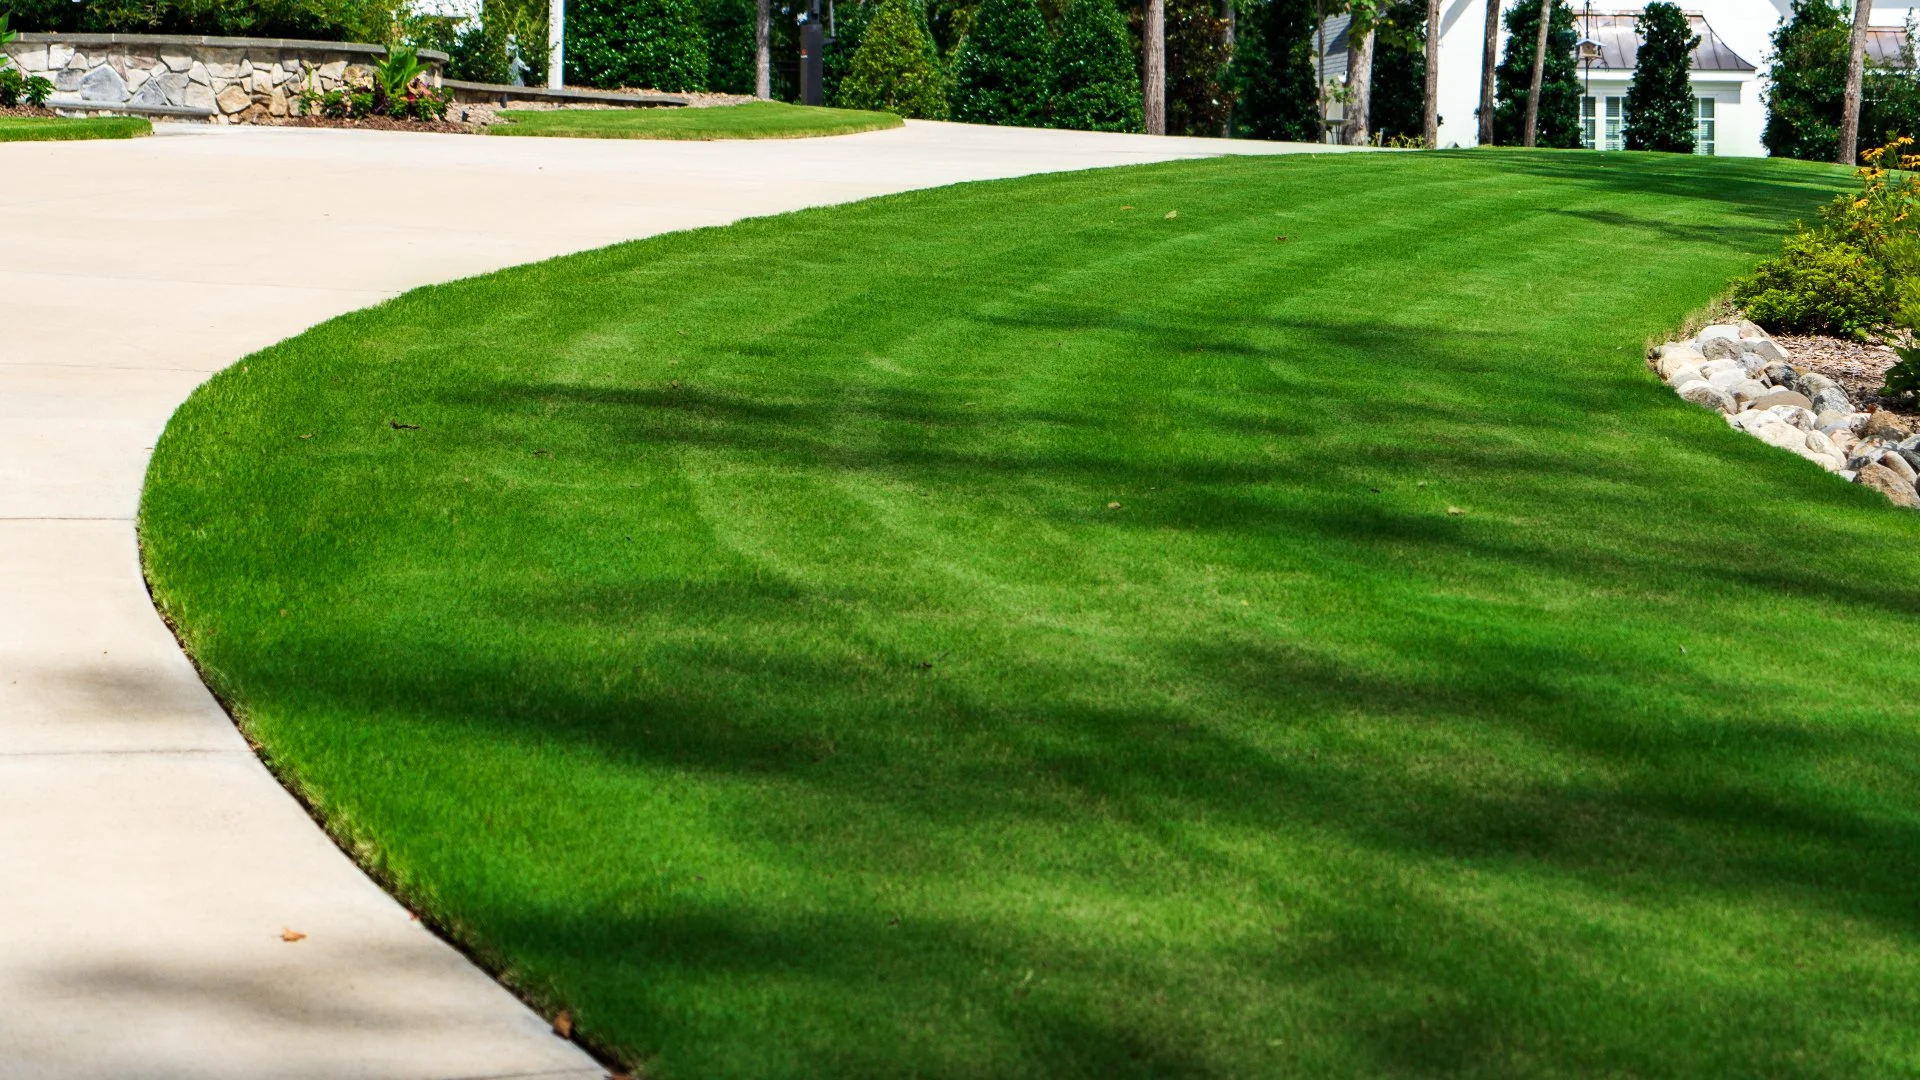 Your New Sod Needs to Be Watered Properly - Here's How